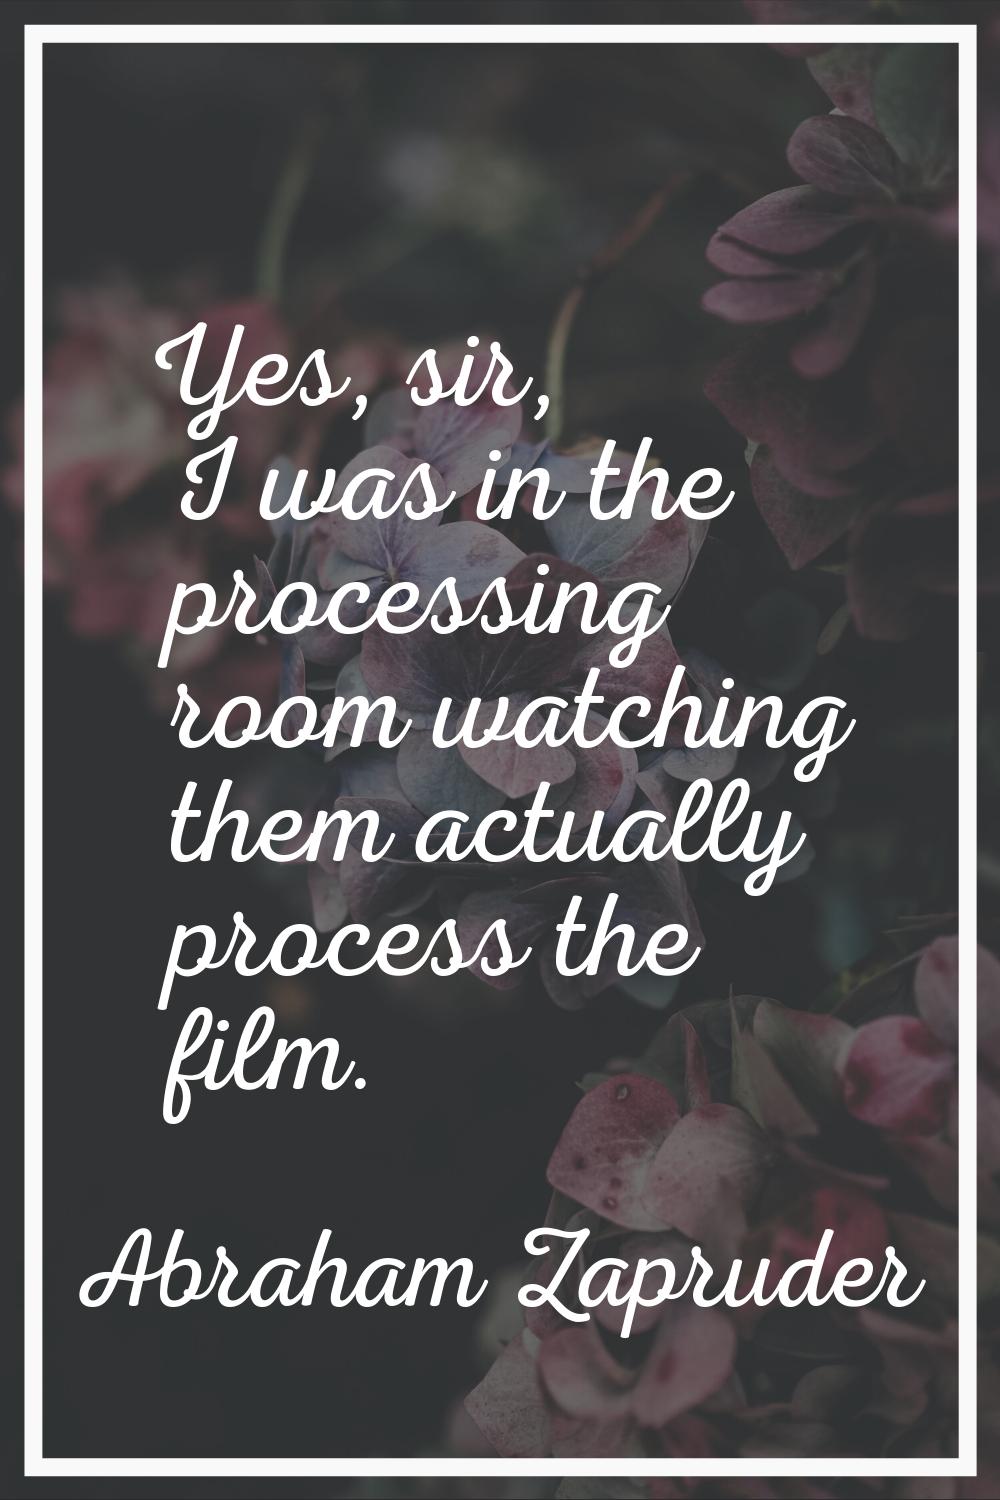 Yes, sir, I was in the processing room watching them actually process the film.